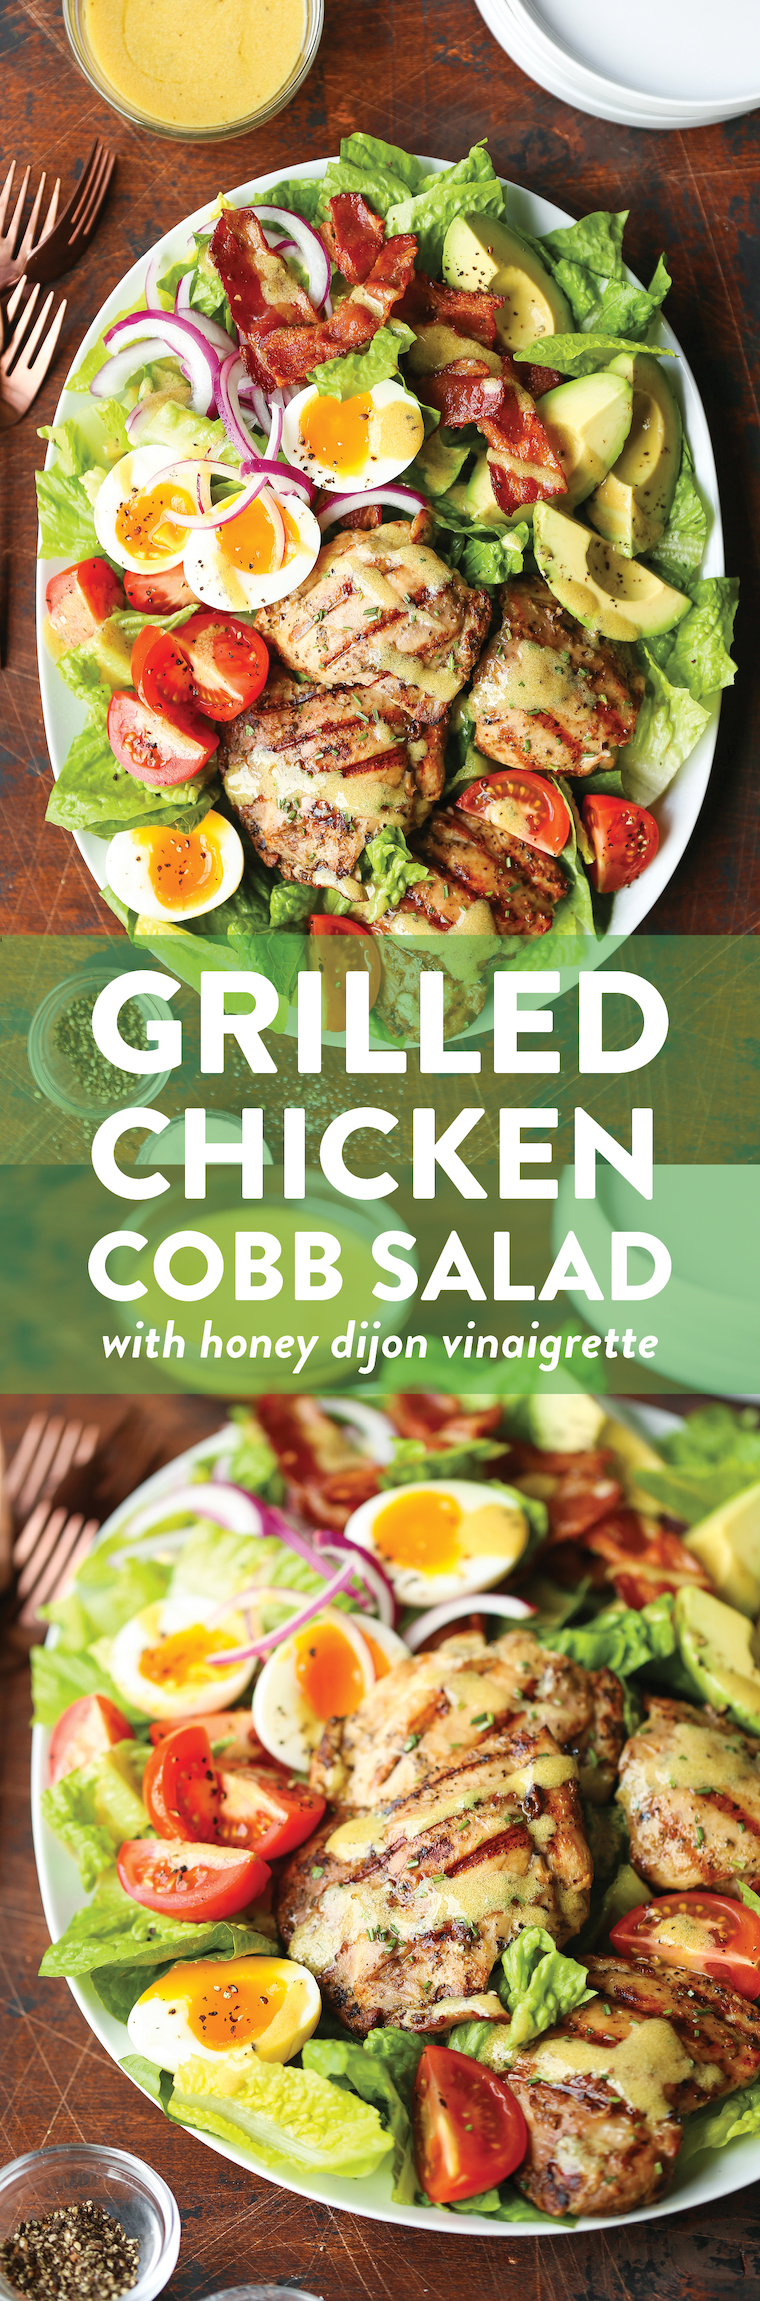 Grilled Chicken Cobb Salad - No more boring cobb salads! Made with the juiciest garlic rosemary chicken thighs and the most flavorful honey Dijon dressing!